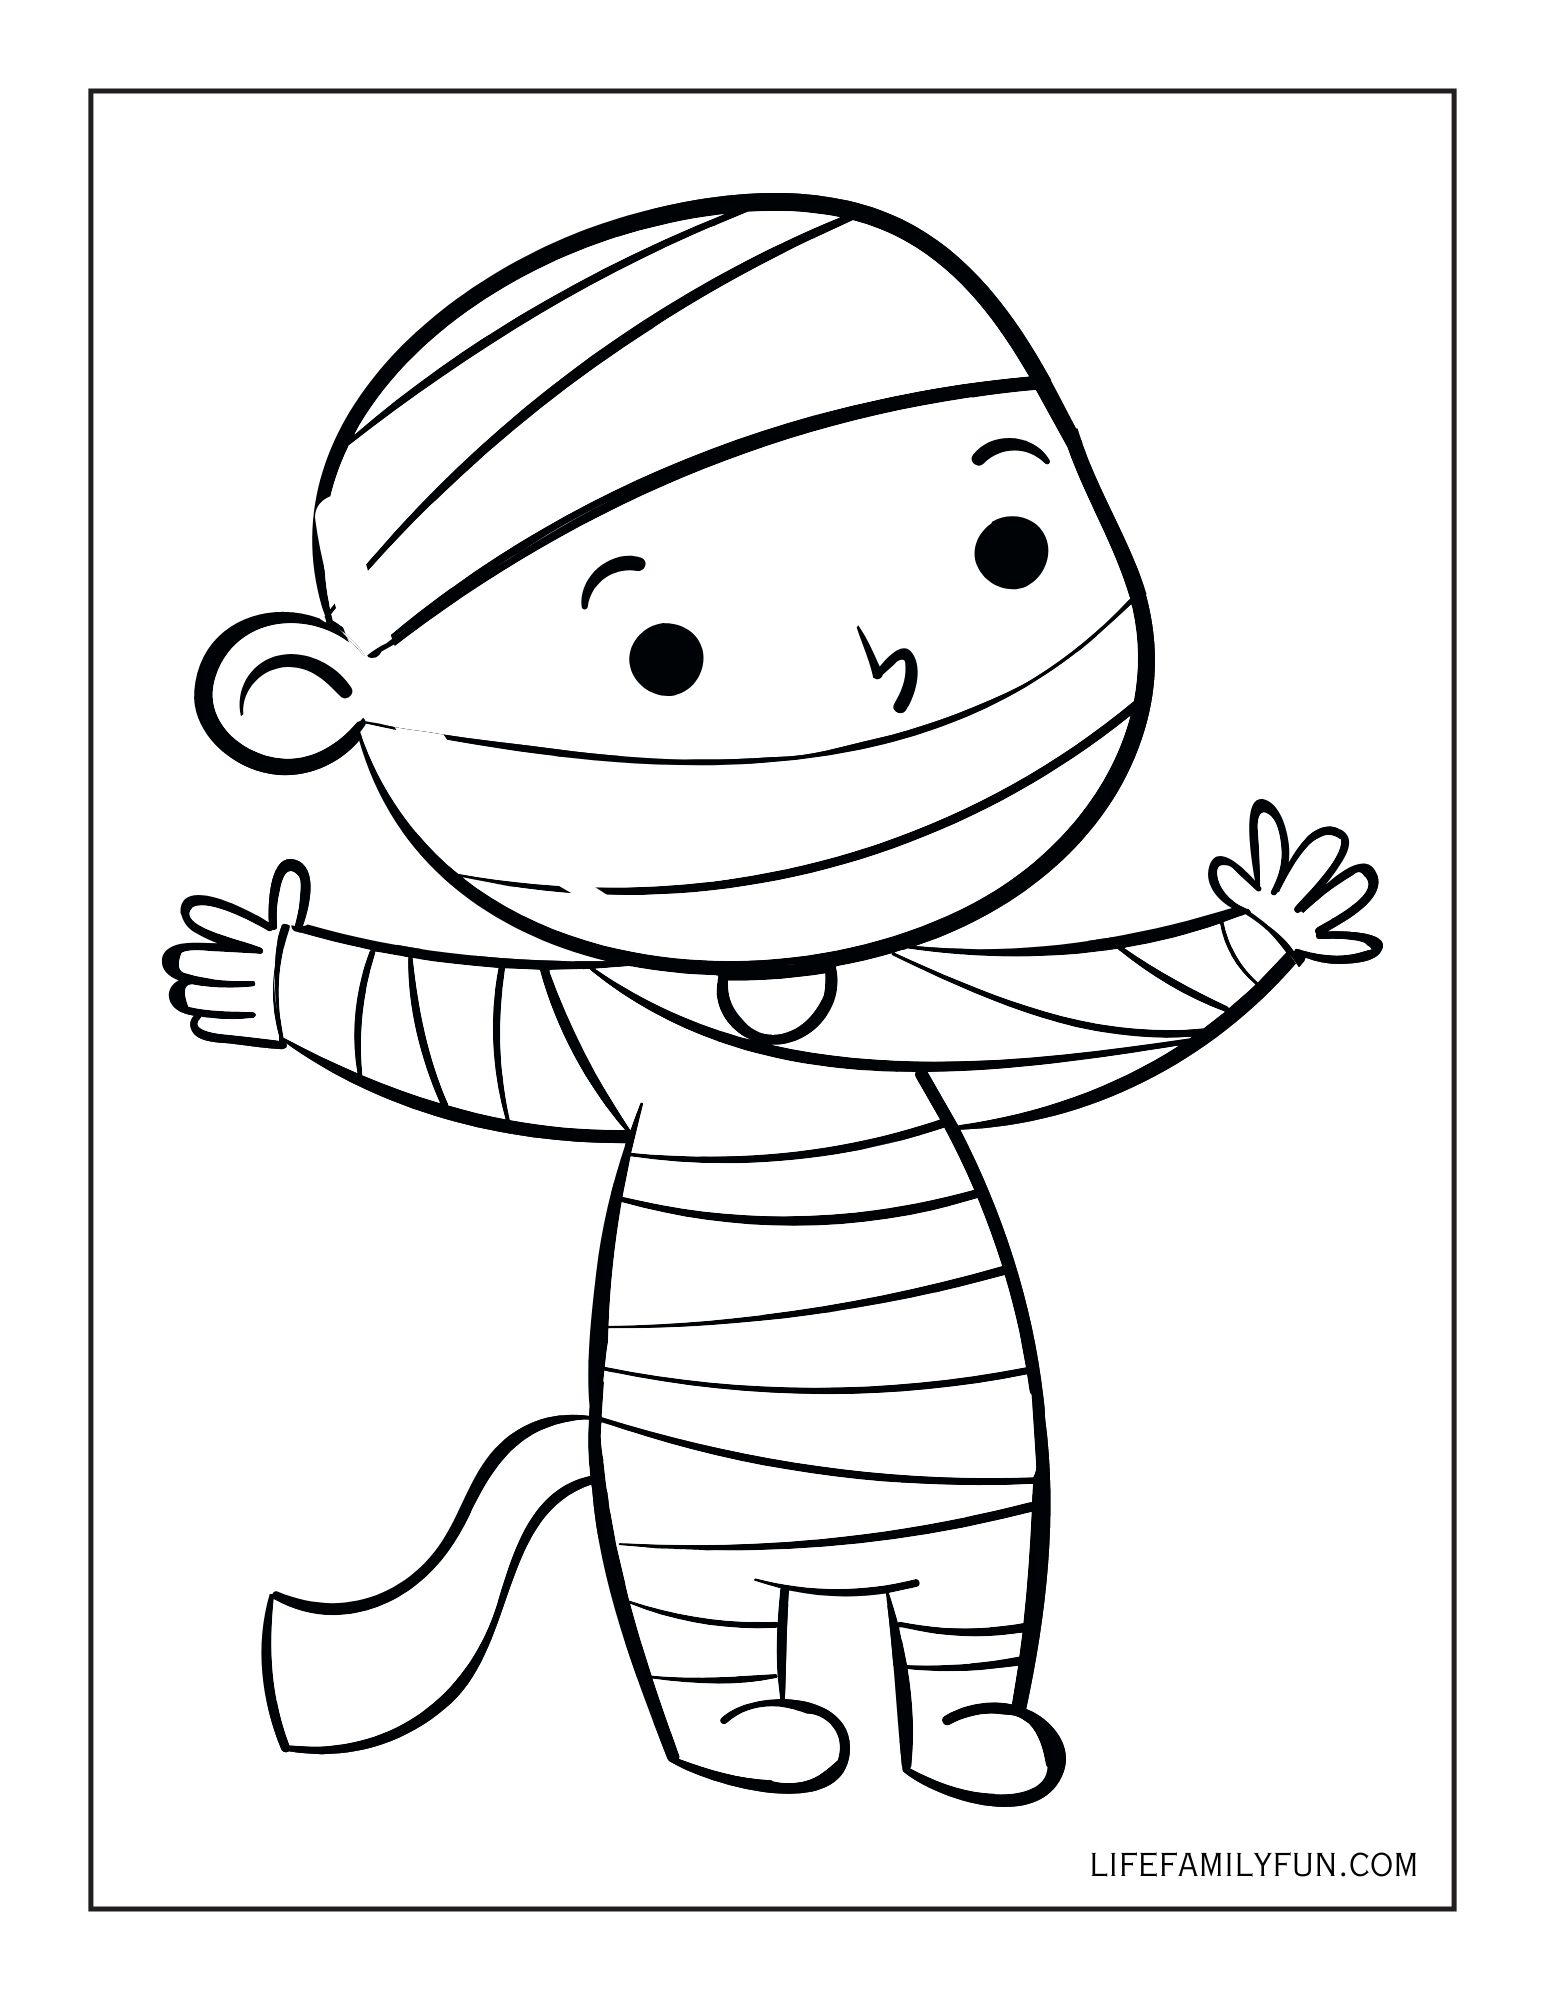 Patch Mummy Coloring Page